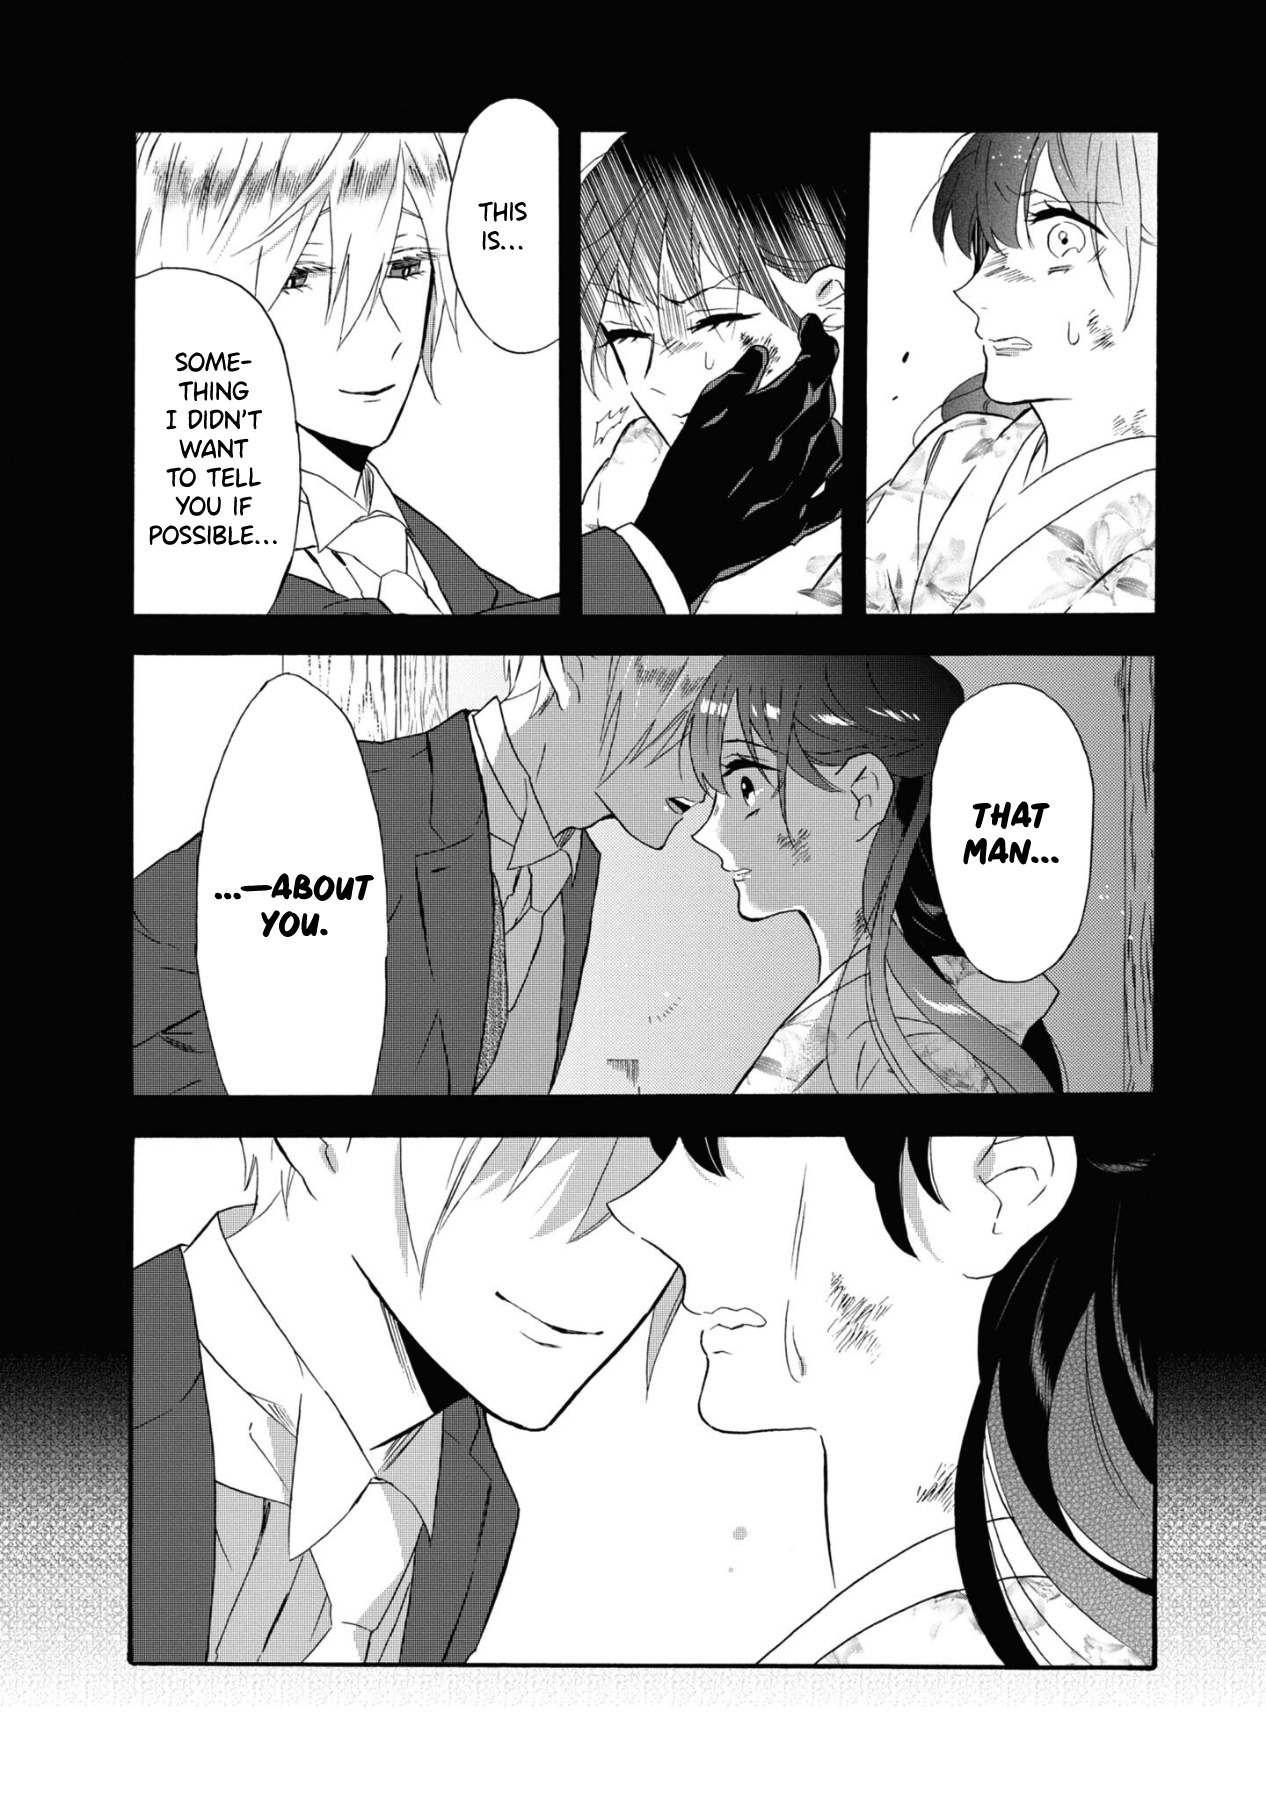 Kimi No Koe Vol.3 Chapter 15: An Offered Love Letter, A Day Of Parting - Picture 2